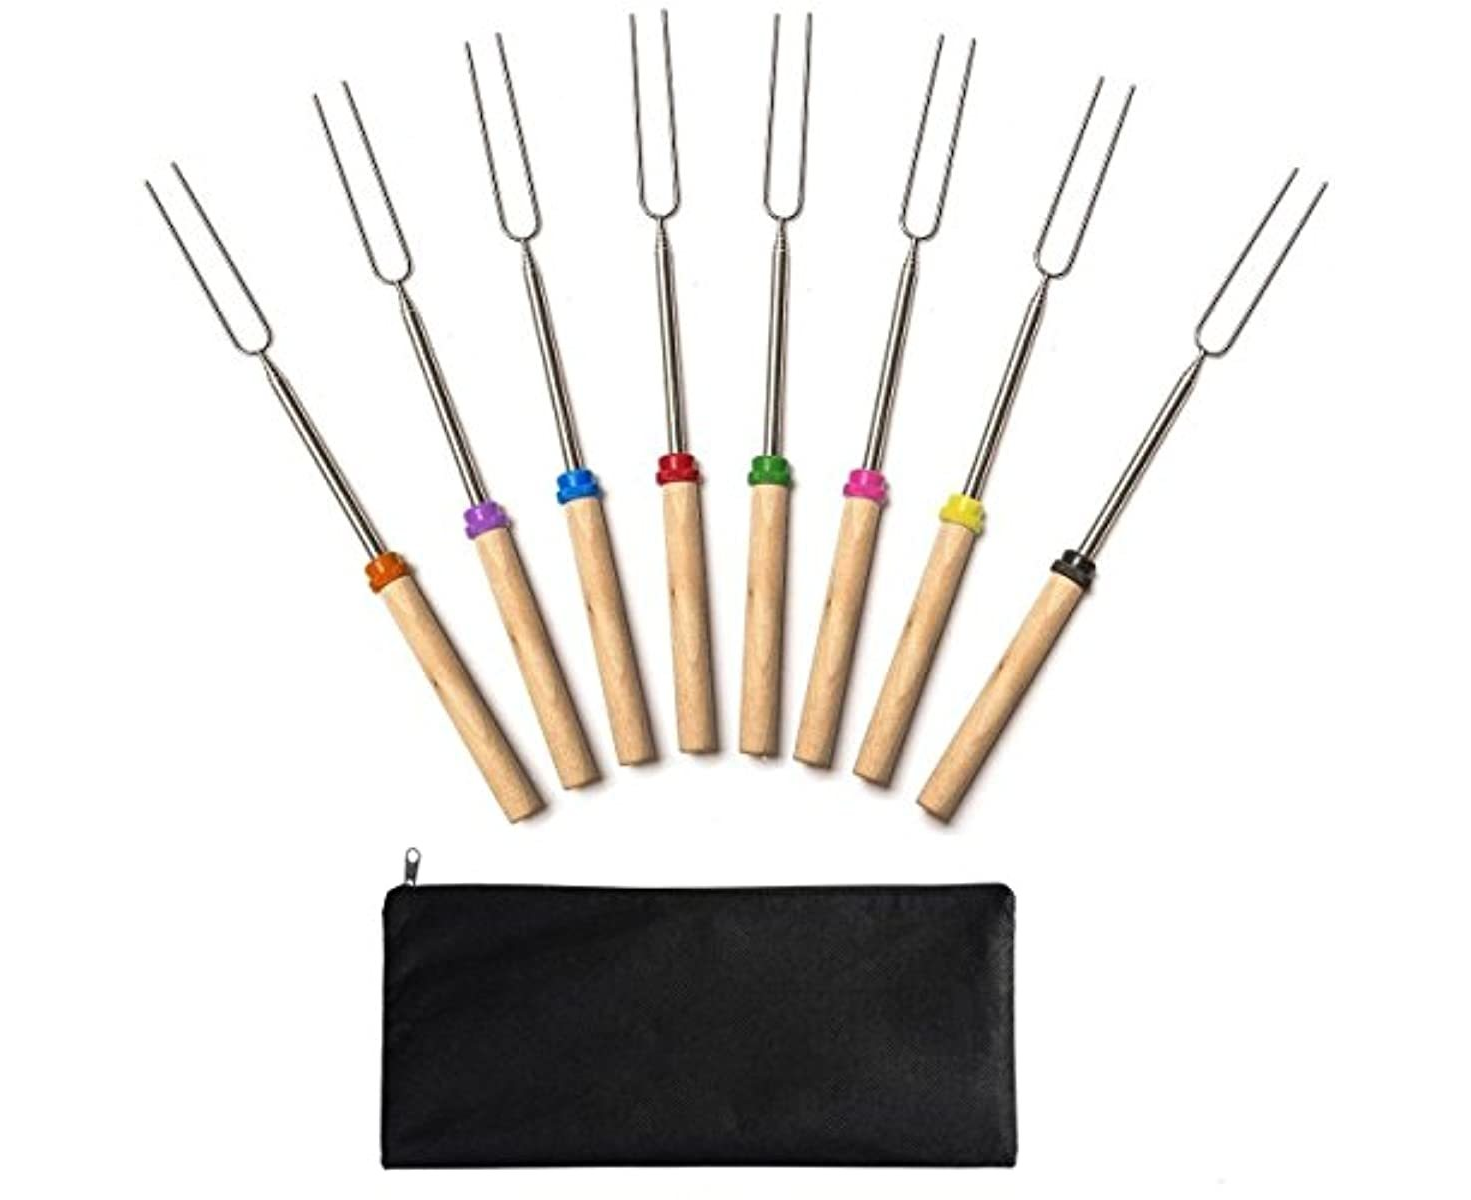 10.43 Roasting Stick Skewer with Wooden Handle for Camping Picnic Marshmallows and Campfire Sausages Wooden Handle BBQ Fork 